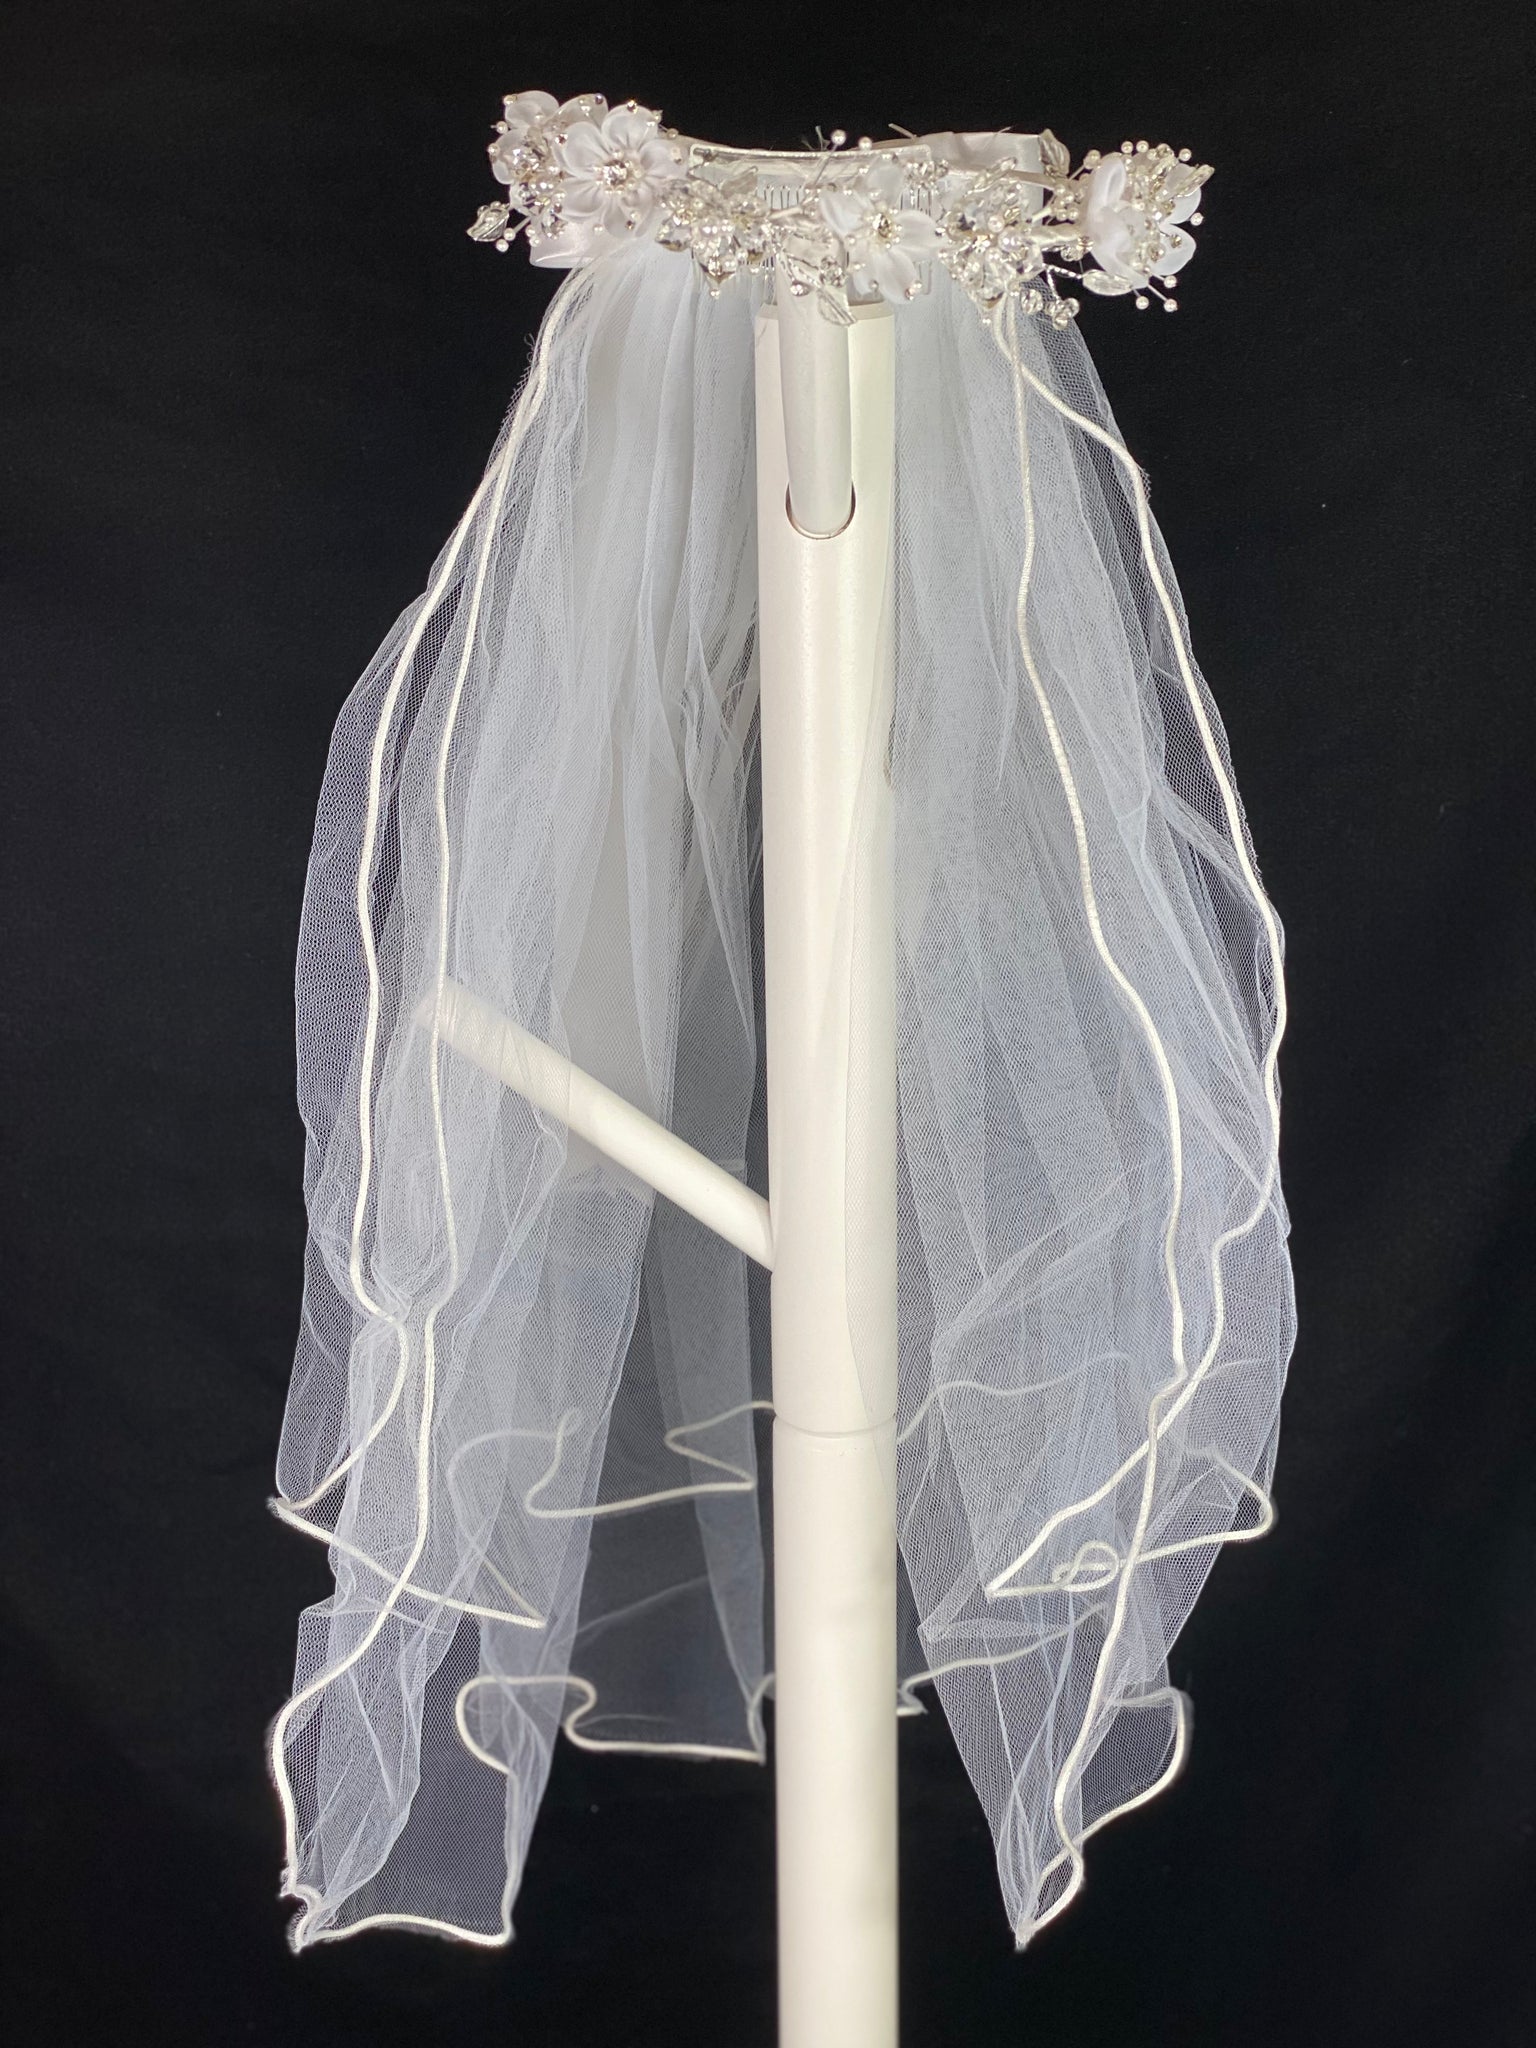 Elegant soft 2 layer tulle veil with delicate hand stitched braided satin trim around the edge and  handmade flower halo crown with veil with large white satin bow on back. Stain flowers with sparkling rhinestone petals and centers.  Crystal flowers between organza flowers. Beautiful crystal leaves sticking out around flowers.  This double layered veil reaches approximately 24" long, with a crown diameter of 6". Veil has 2" long, 3" wide, comb to secure it in place. 